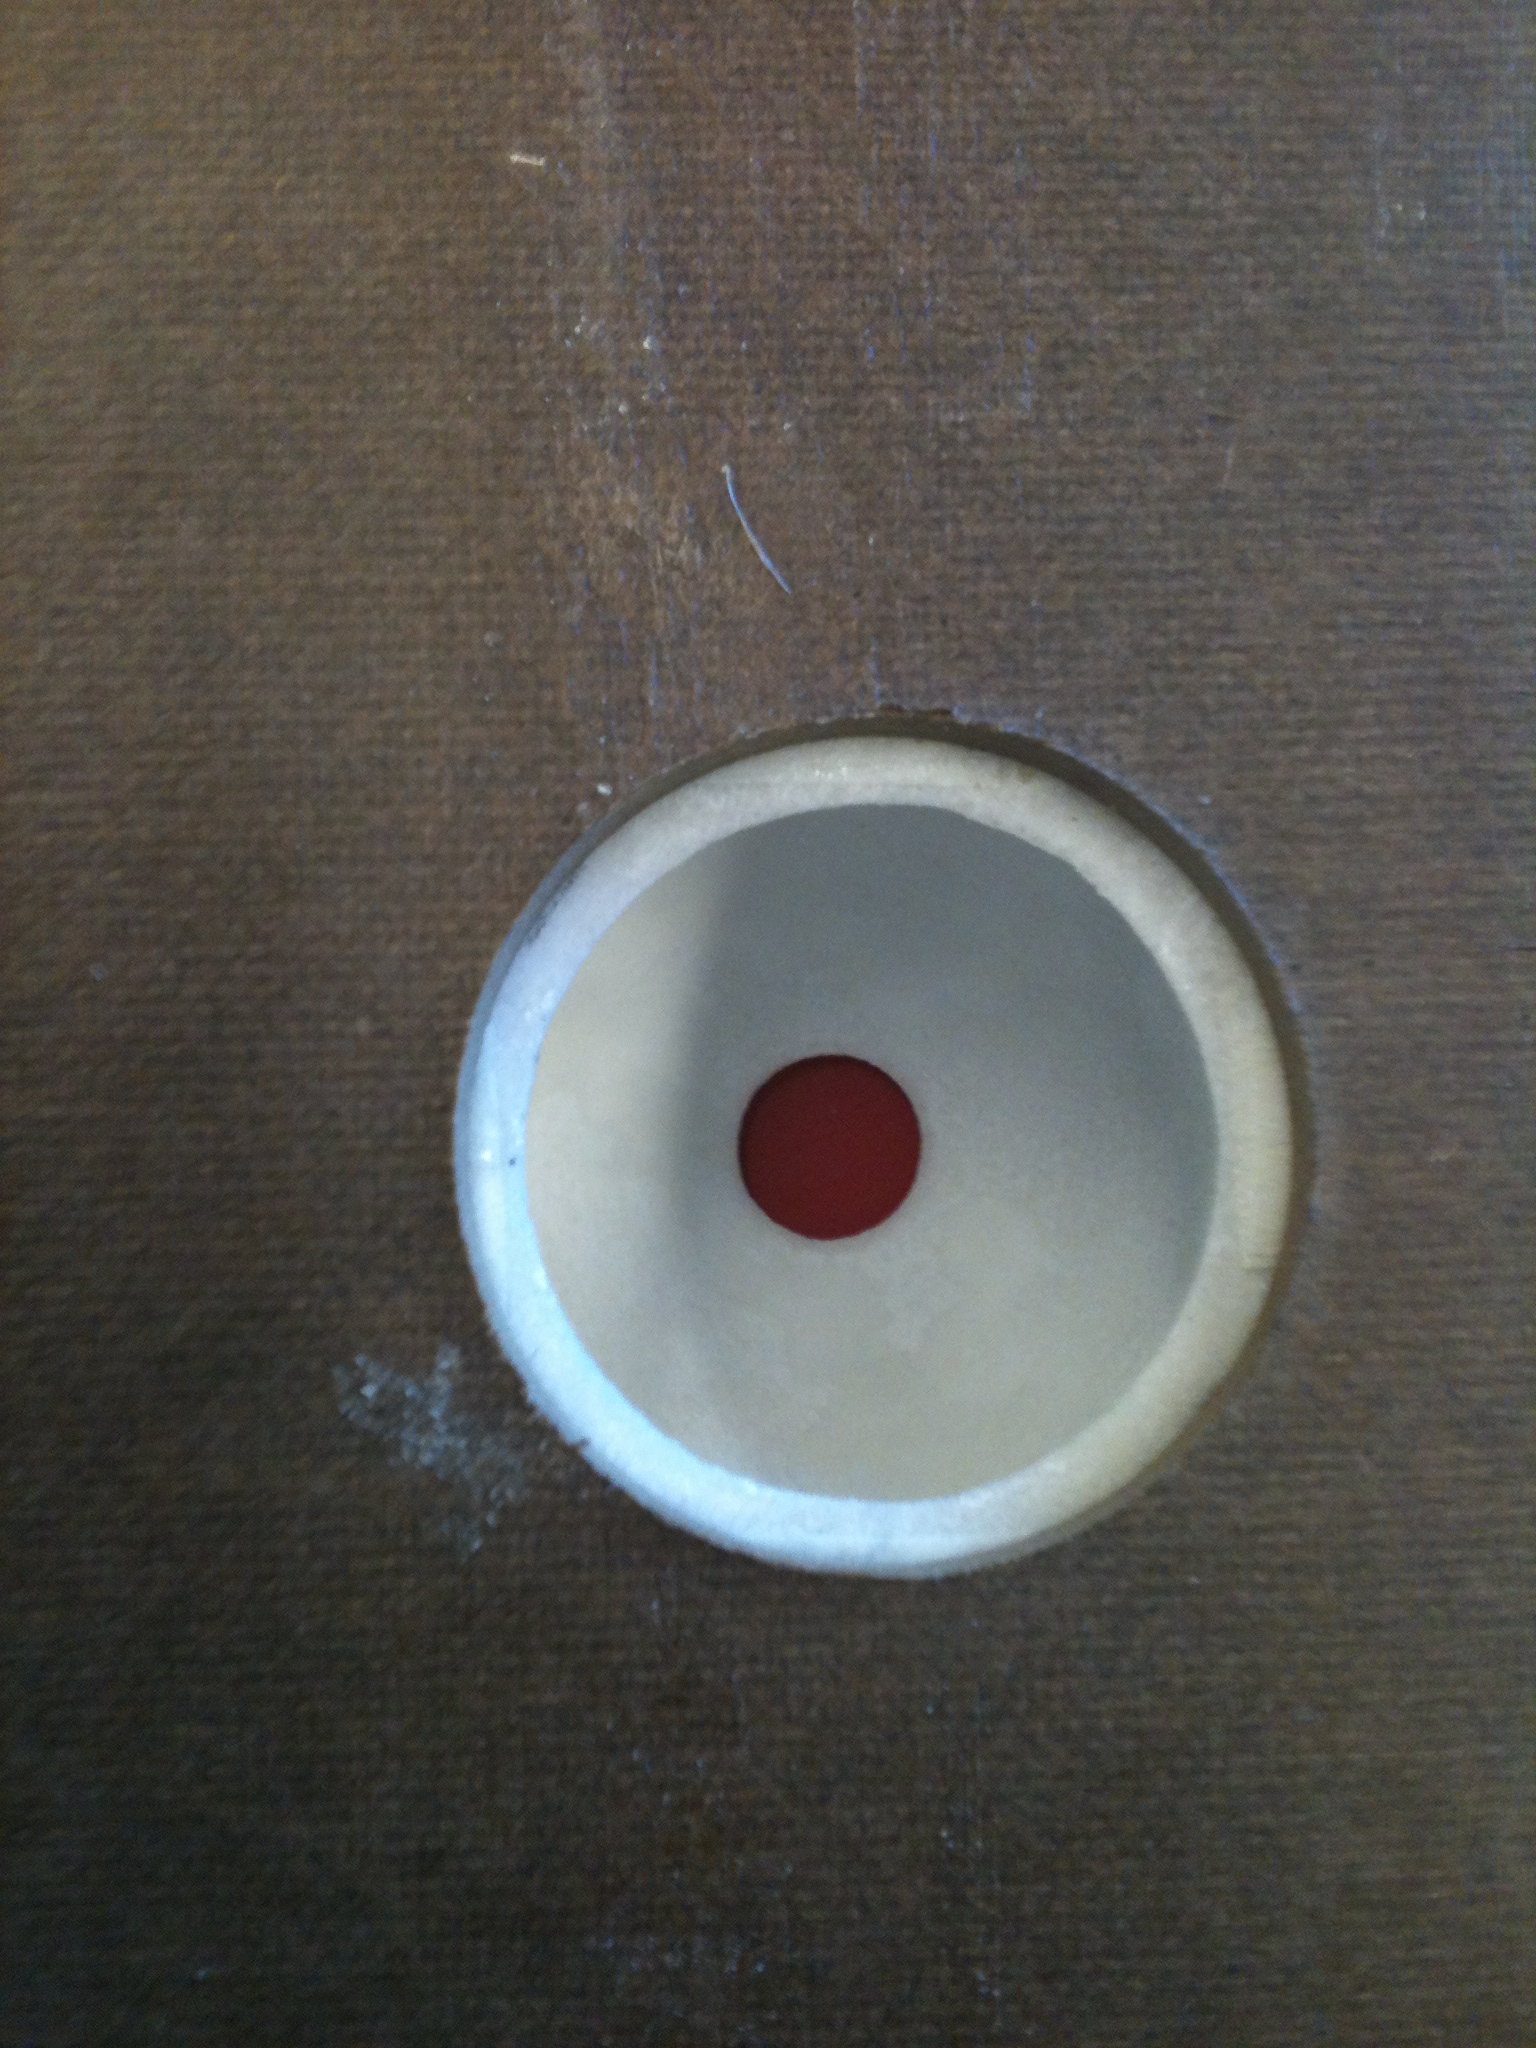 Casting Hollow Spheres in a Mold for an Artificial Reef